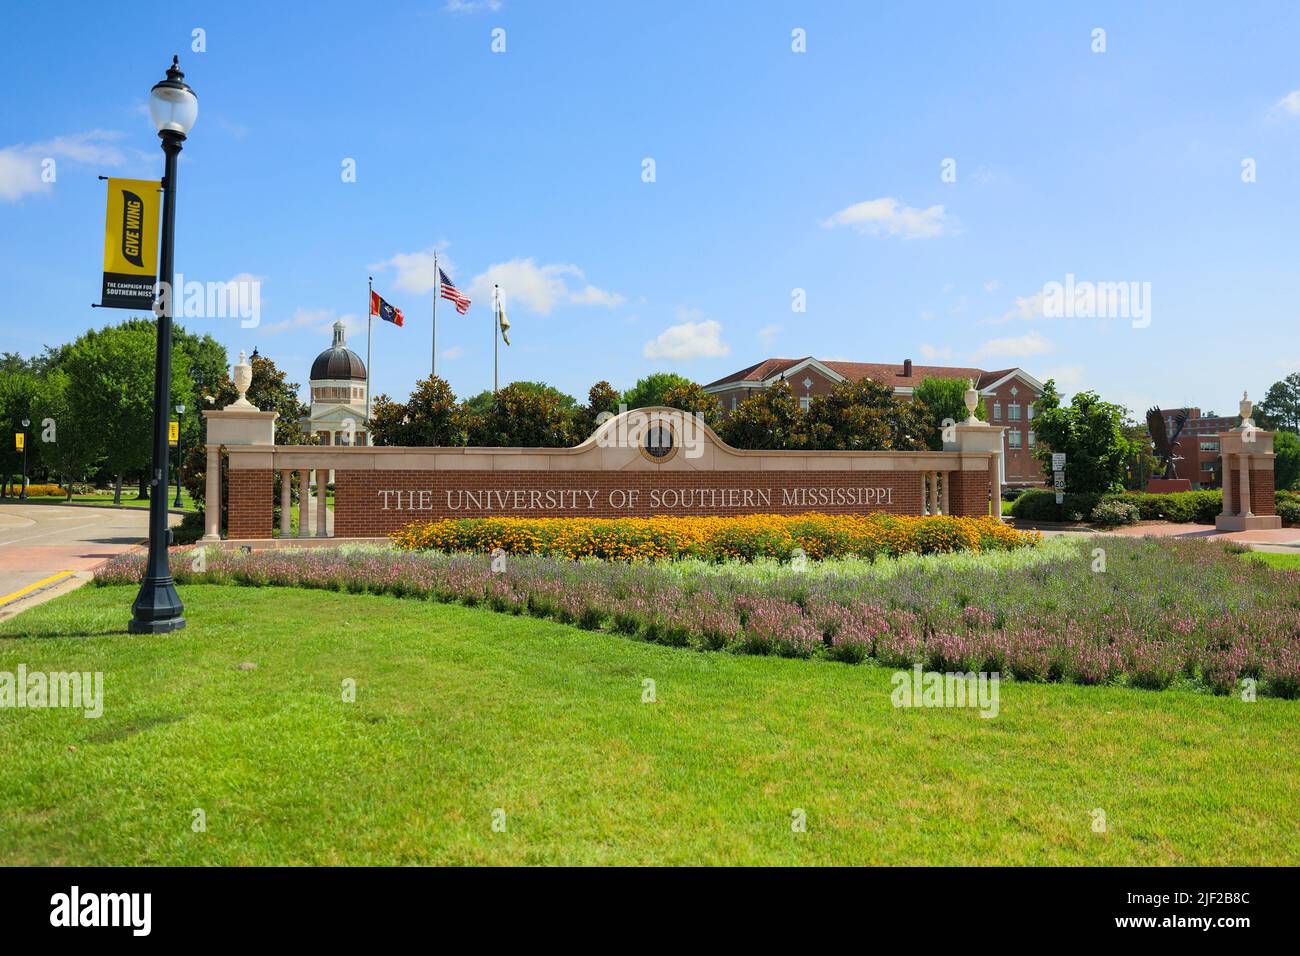 Hattiesburg, MS - June 12, 2022: Entrance sign to the University of Southern Mississippi Stock Photo